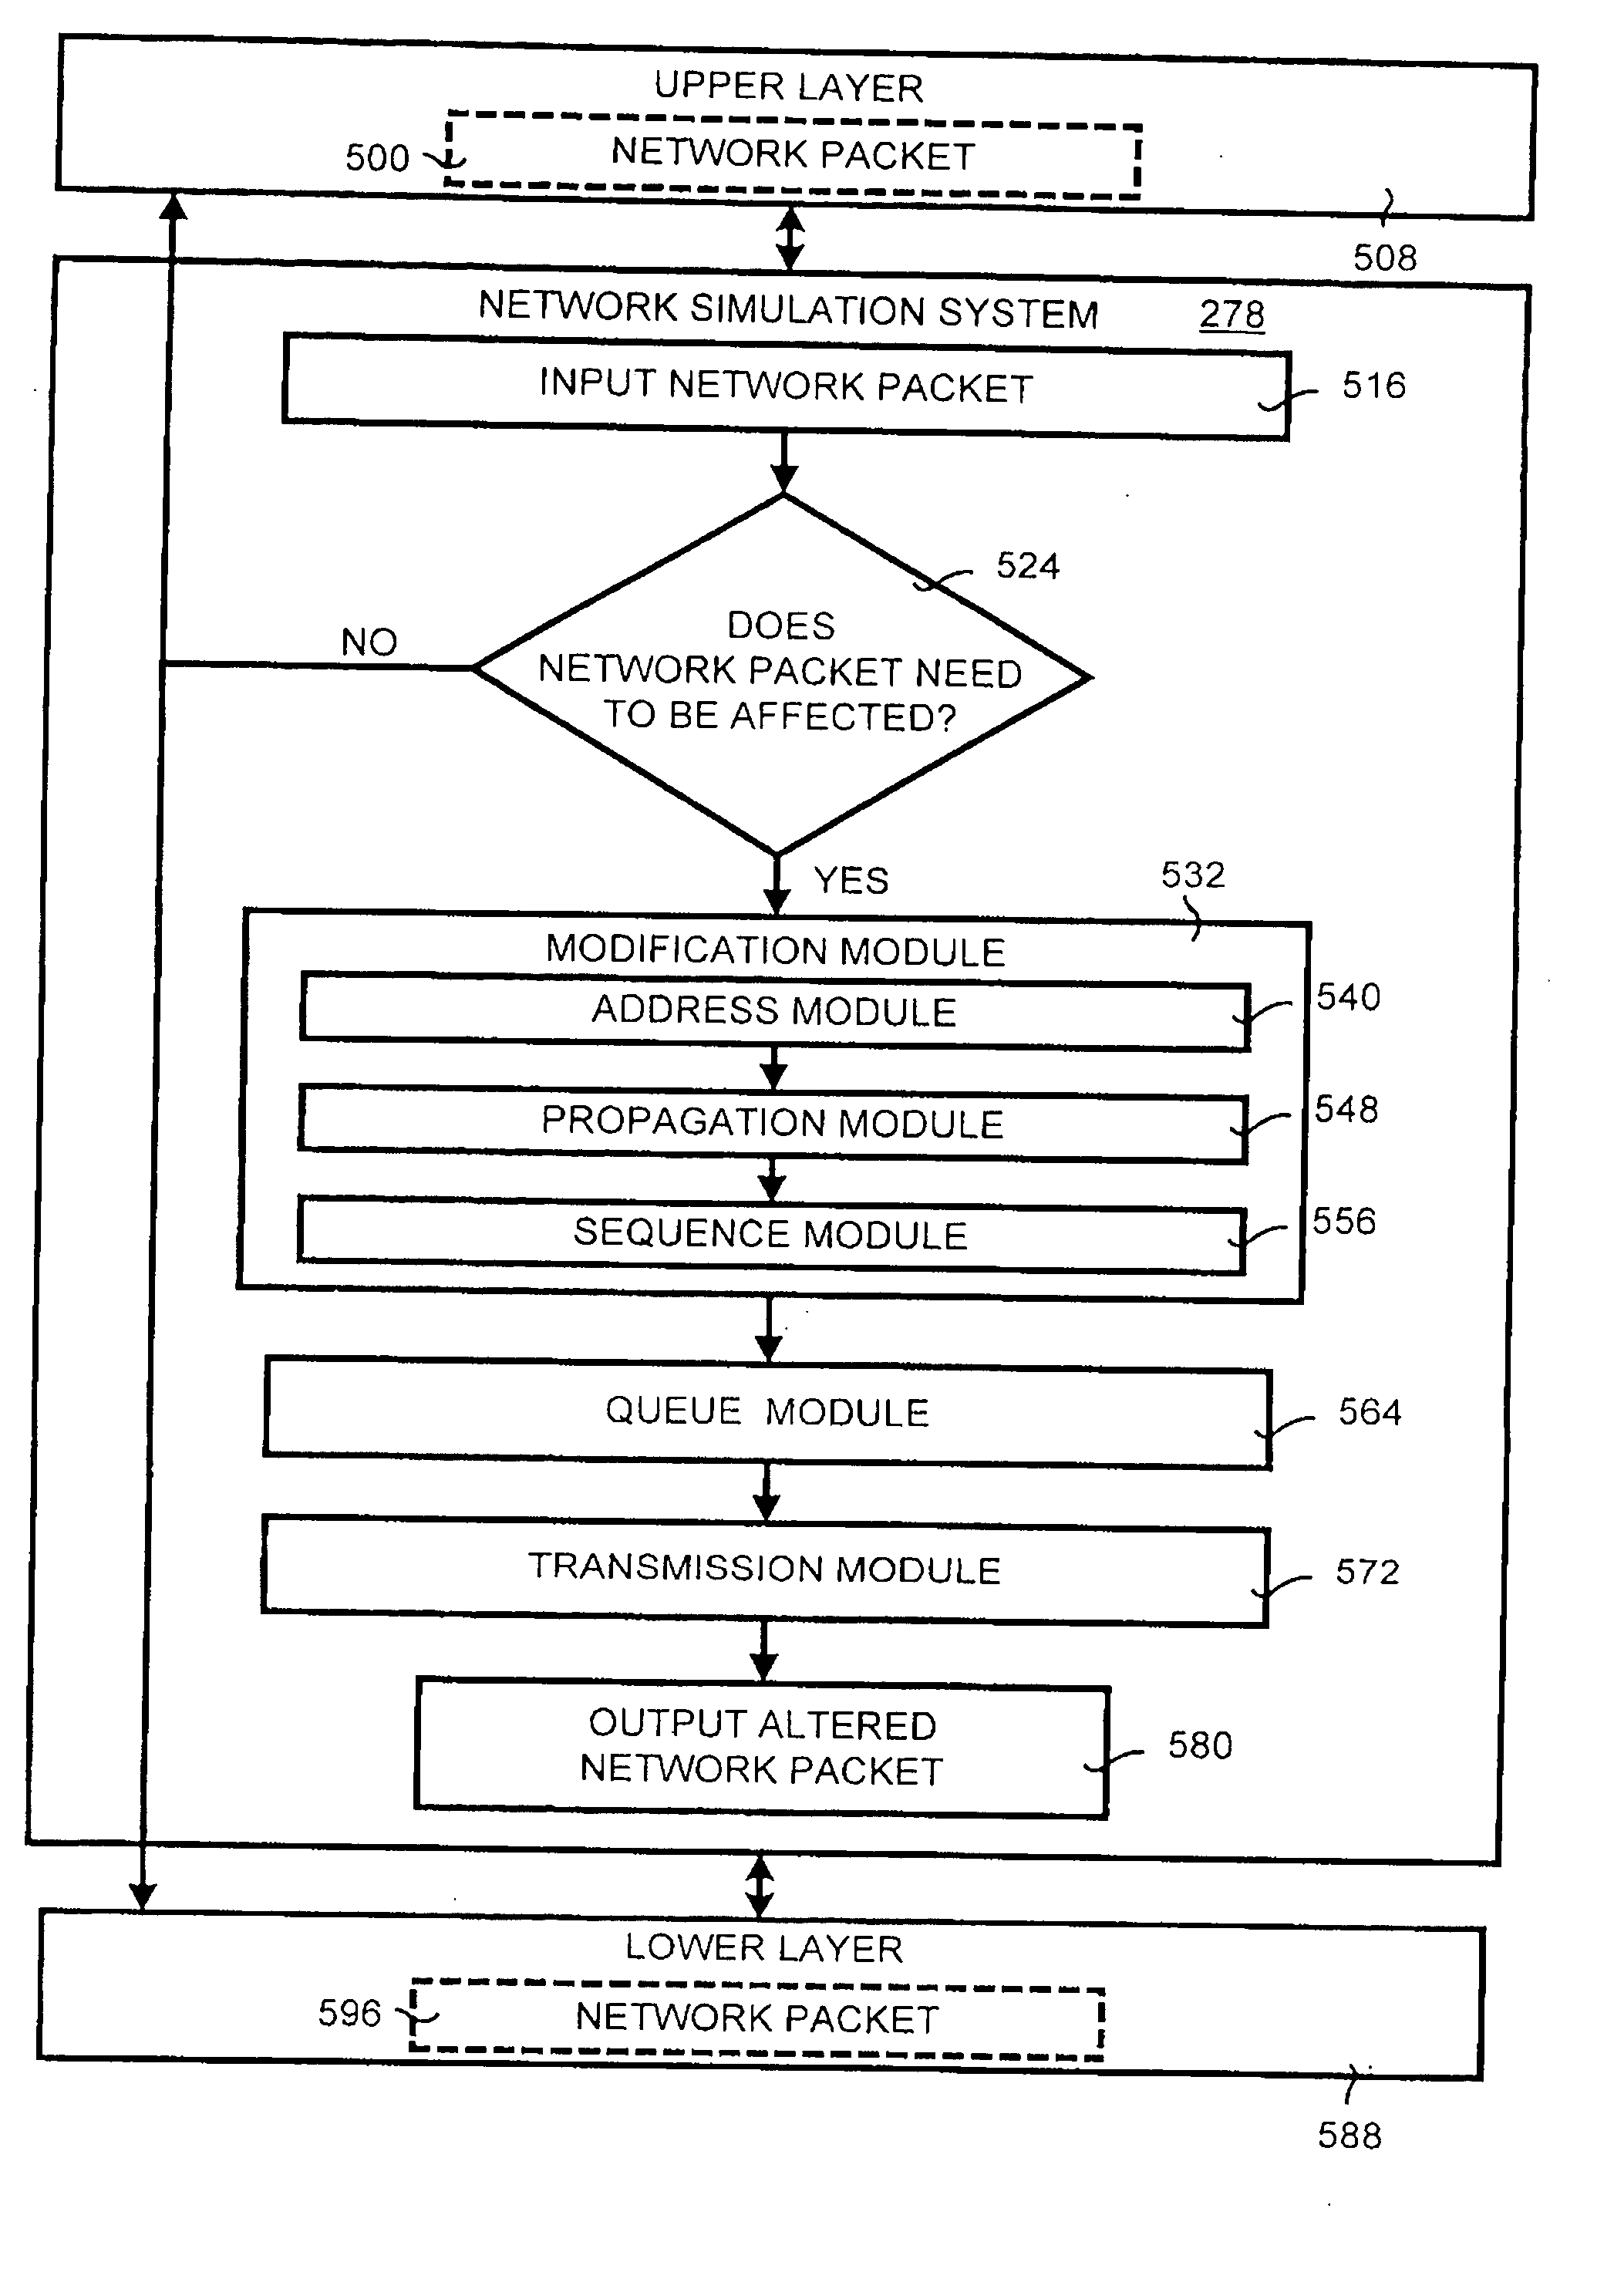 System and method for simulating network connection characteristics